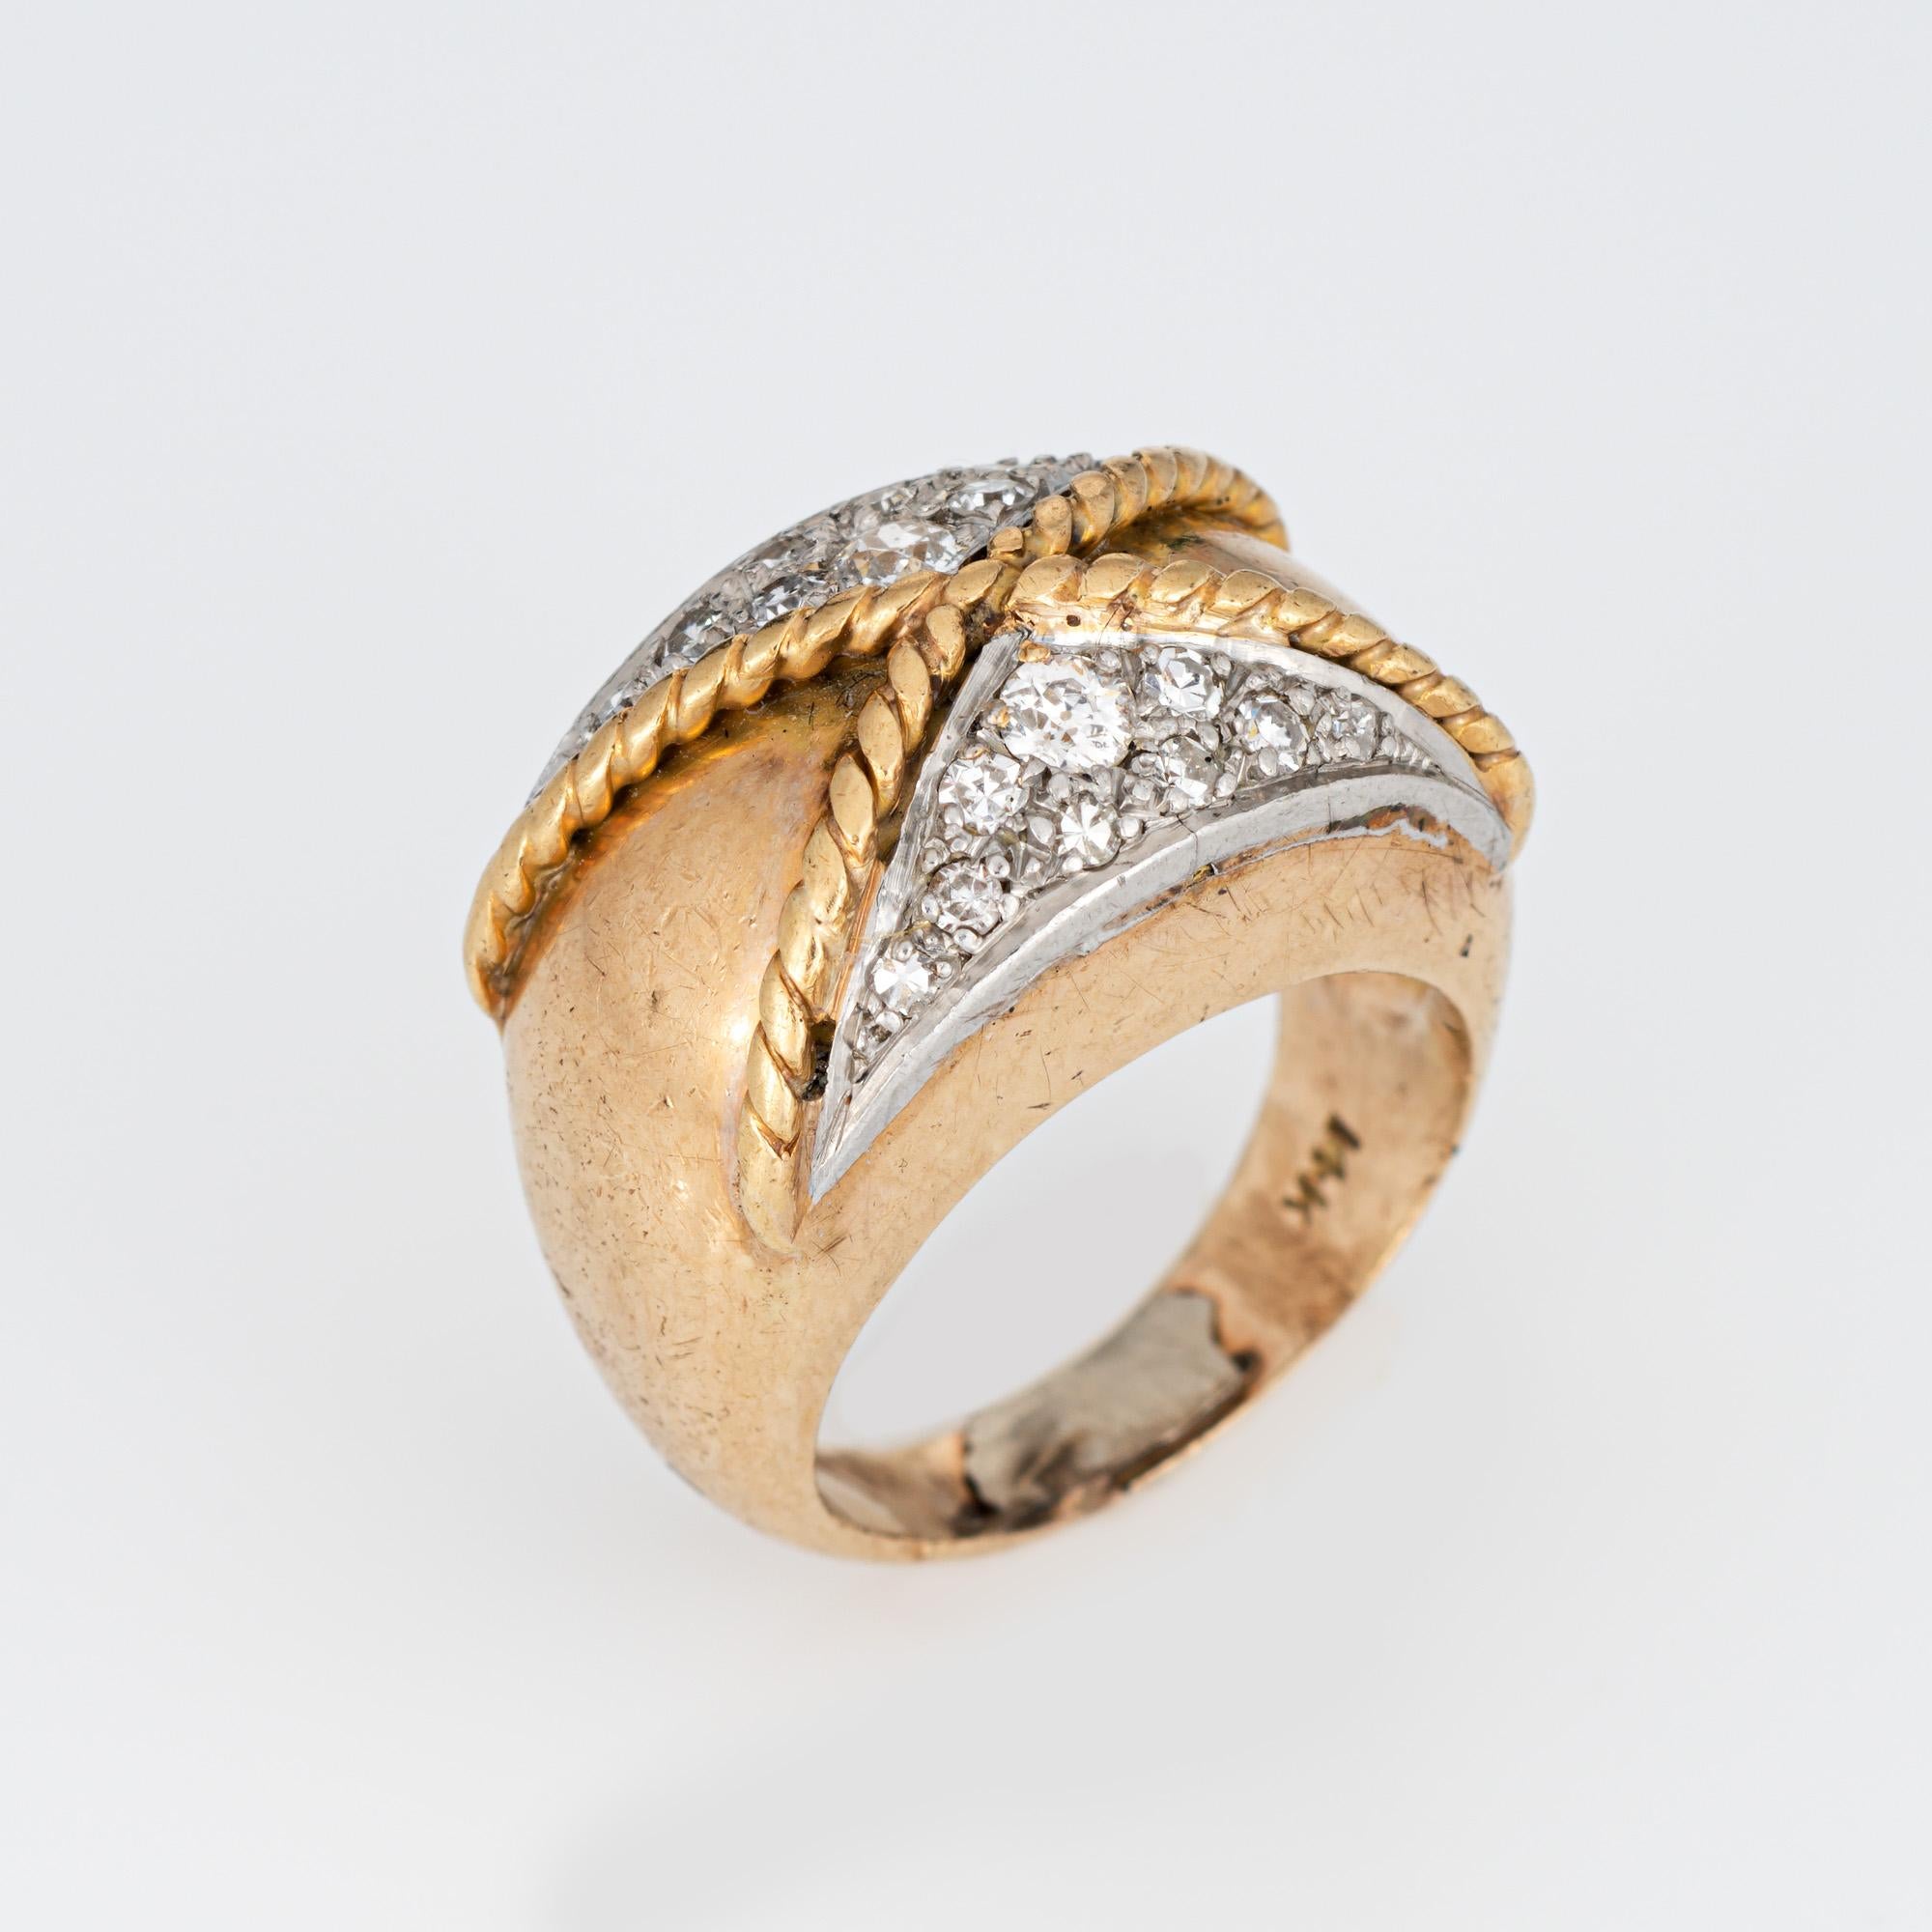 Stylish vintage diamond low dome ring (circa 1970s) crafted in 14 karat yellow gold. 

Old European and single cut diamonds total an estimated 0.20 carats (estimated at I-J color and SI2-I2 clarity). 

The low dome band with a distinct crossover